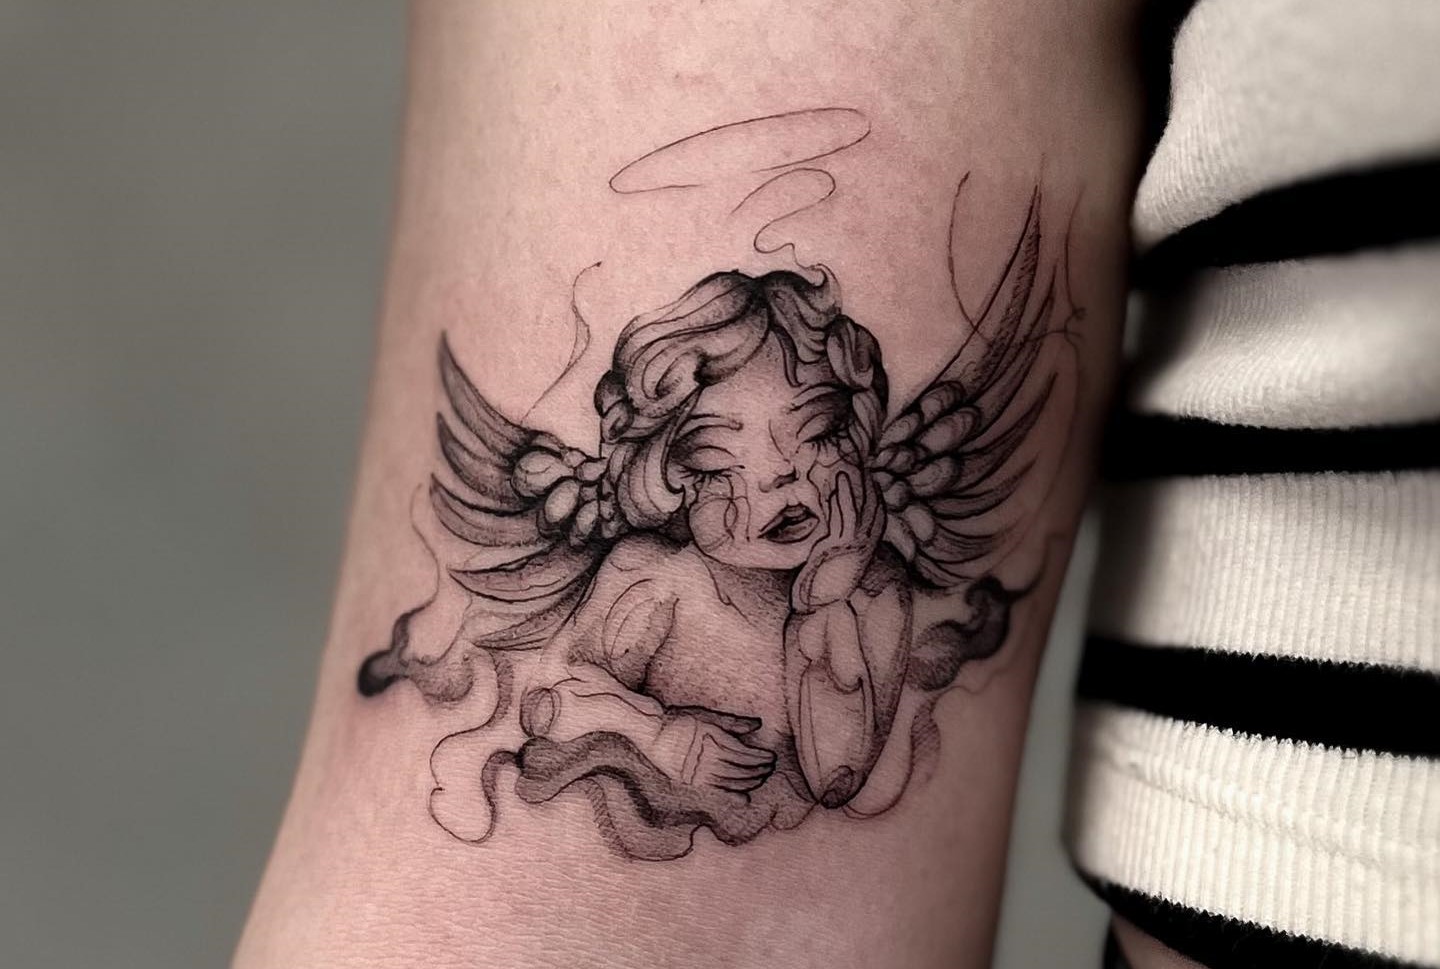 Baby angel tattoo meaning